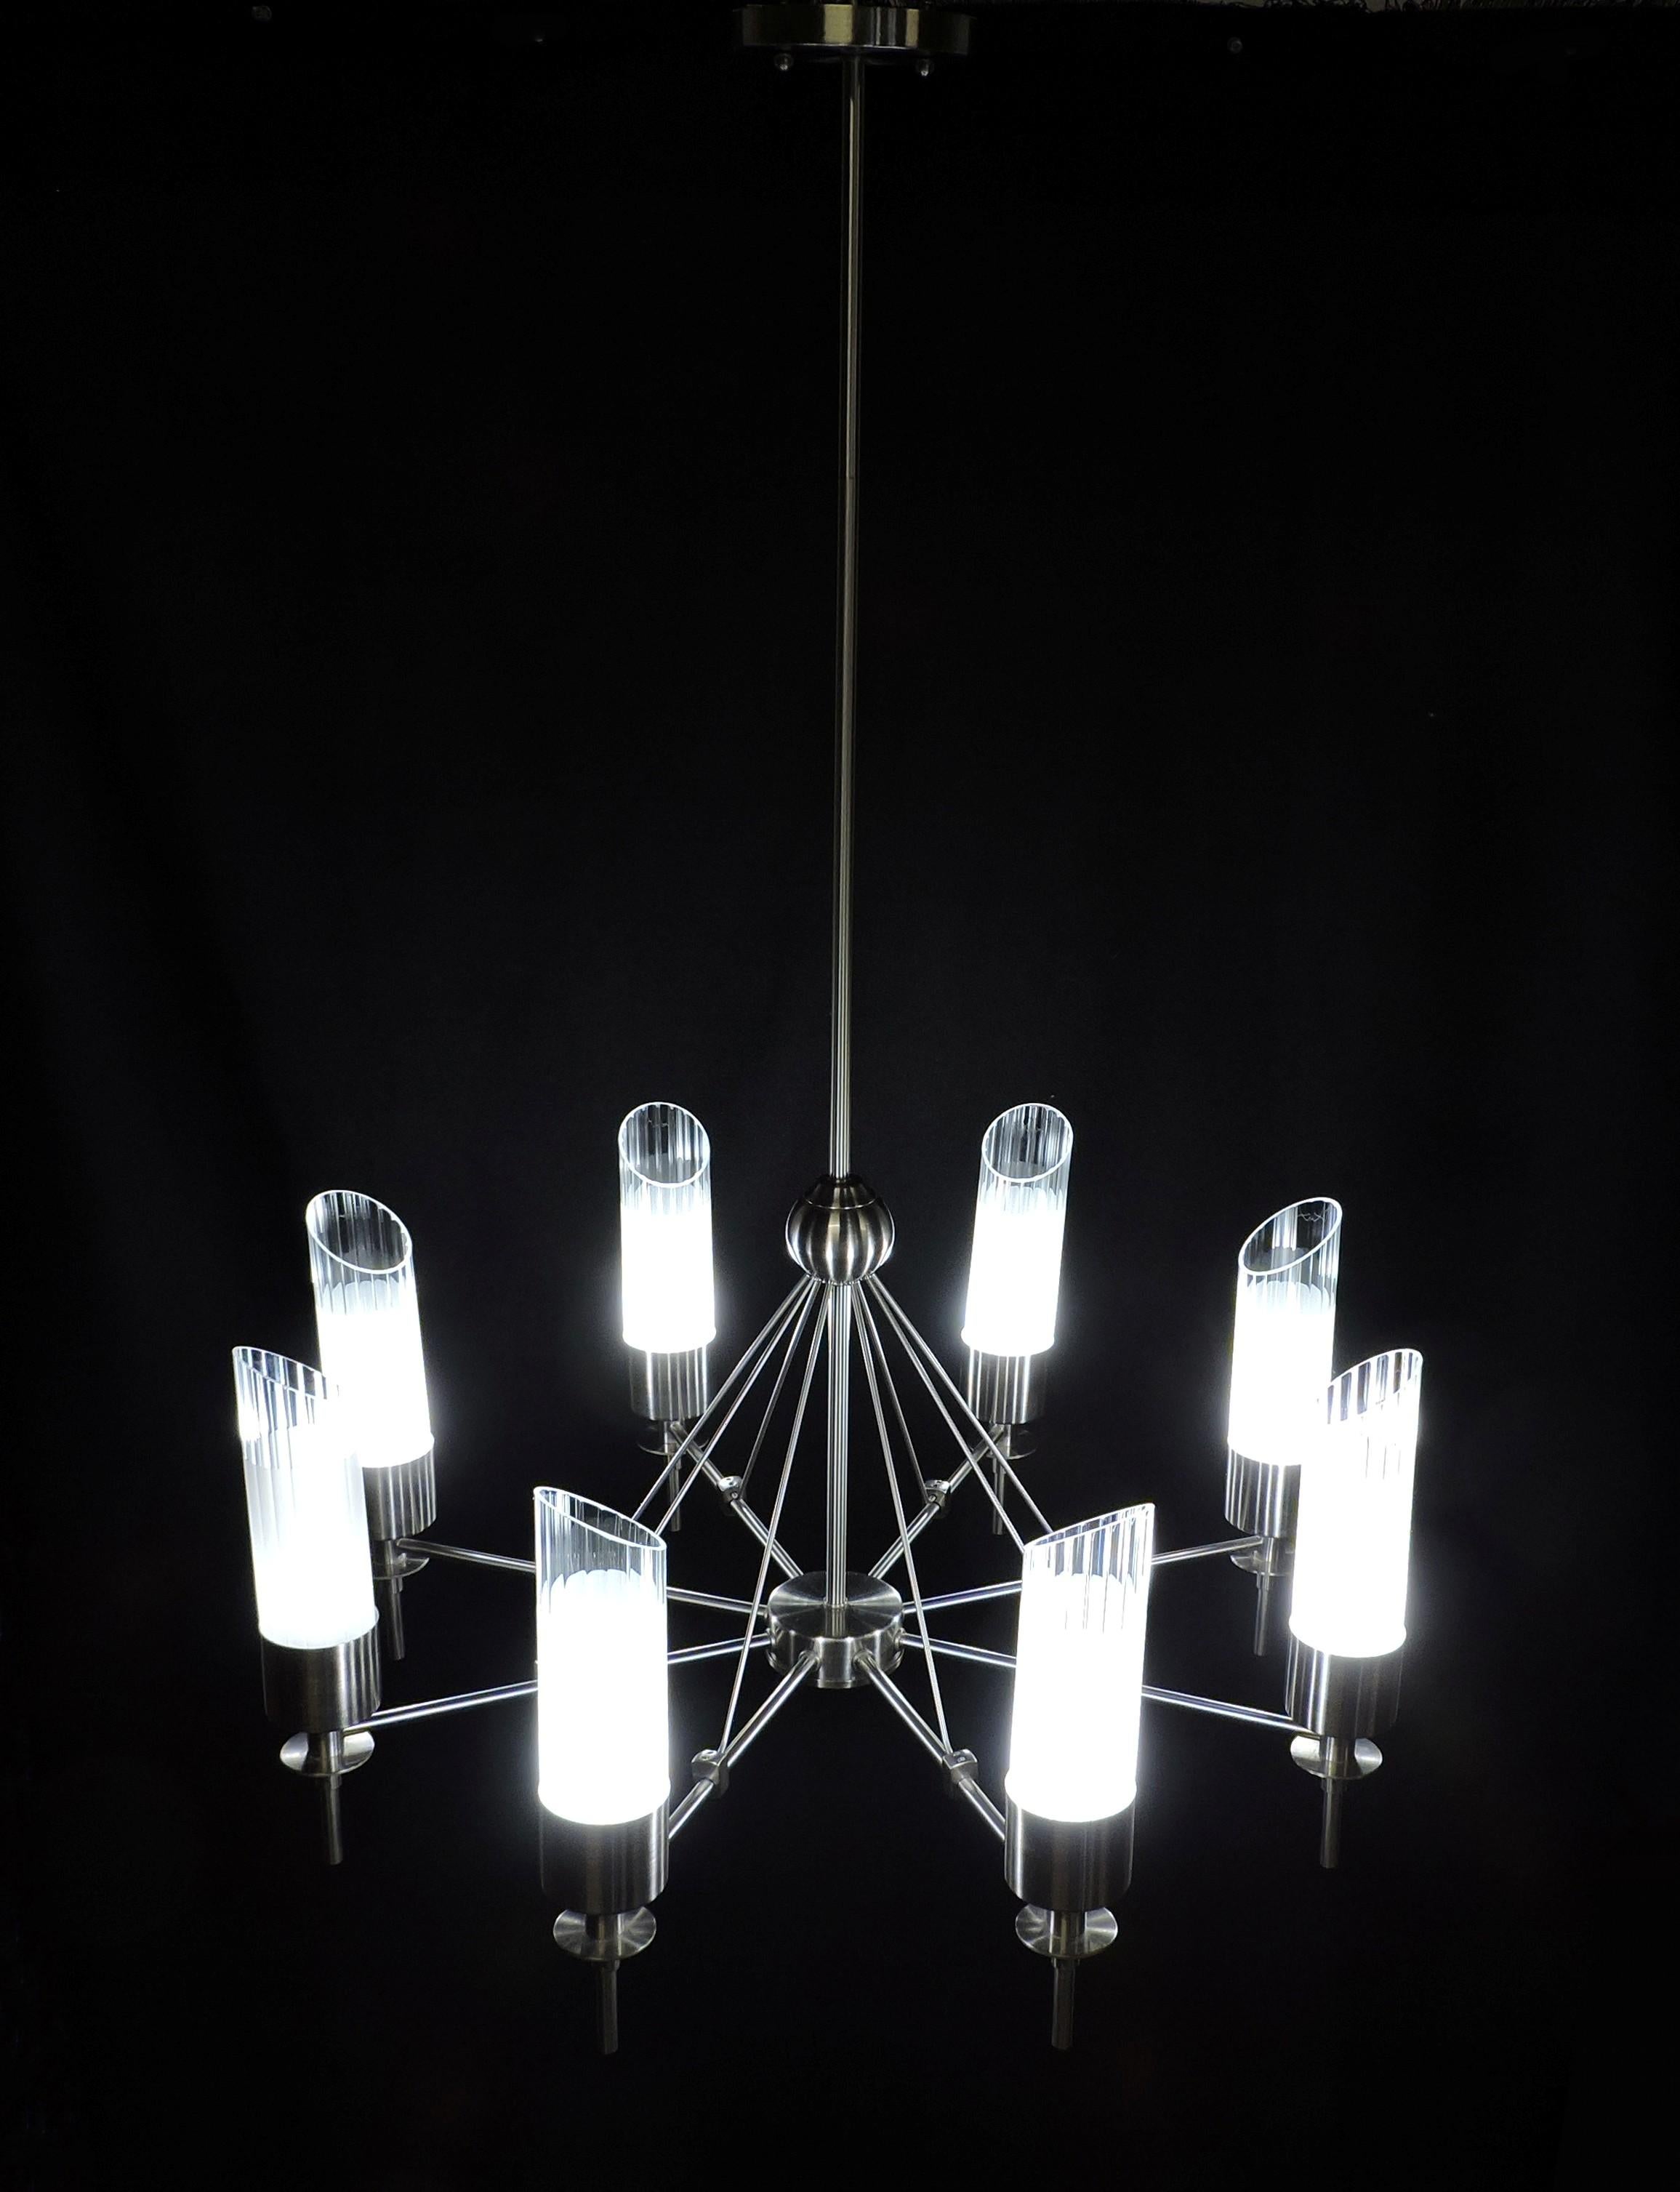 Handsome chandelier by high end design retailer, Luminaire. This impressive 8 light fixture has a stainless steel finish with cylindrical fluted clear glass shades that are partially frosted. It takes eight G9 base bulbs, which can be either halogen